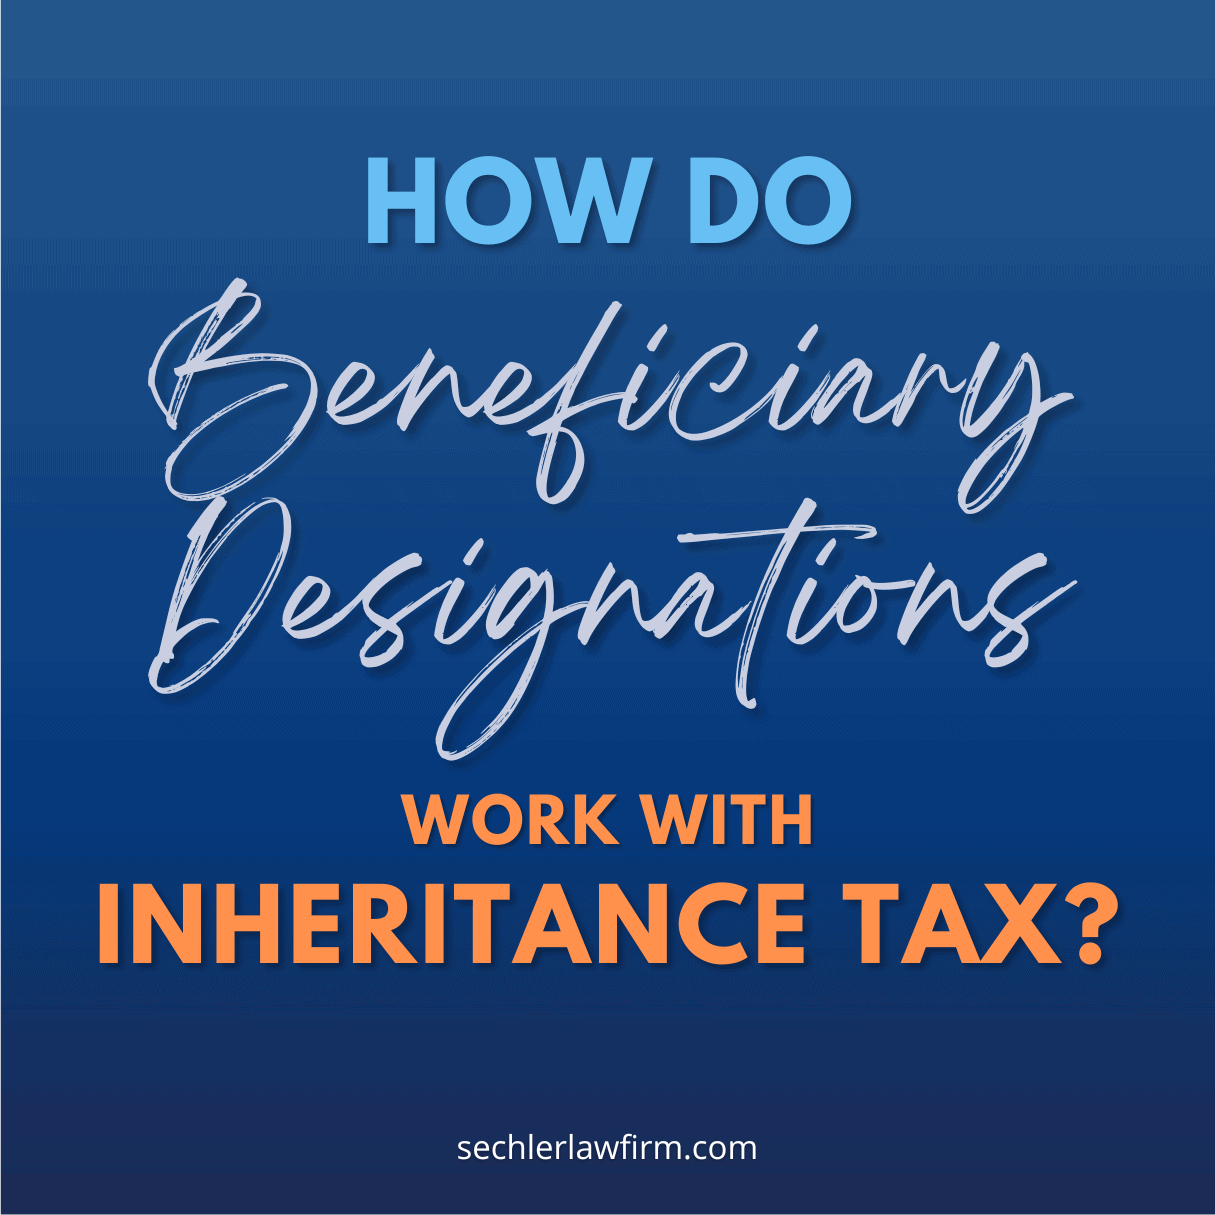 How do Beneficiary Designations work with Inheritance Tax?